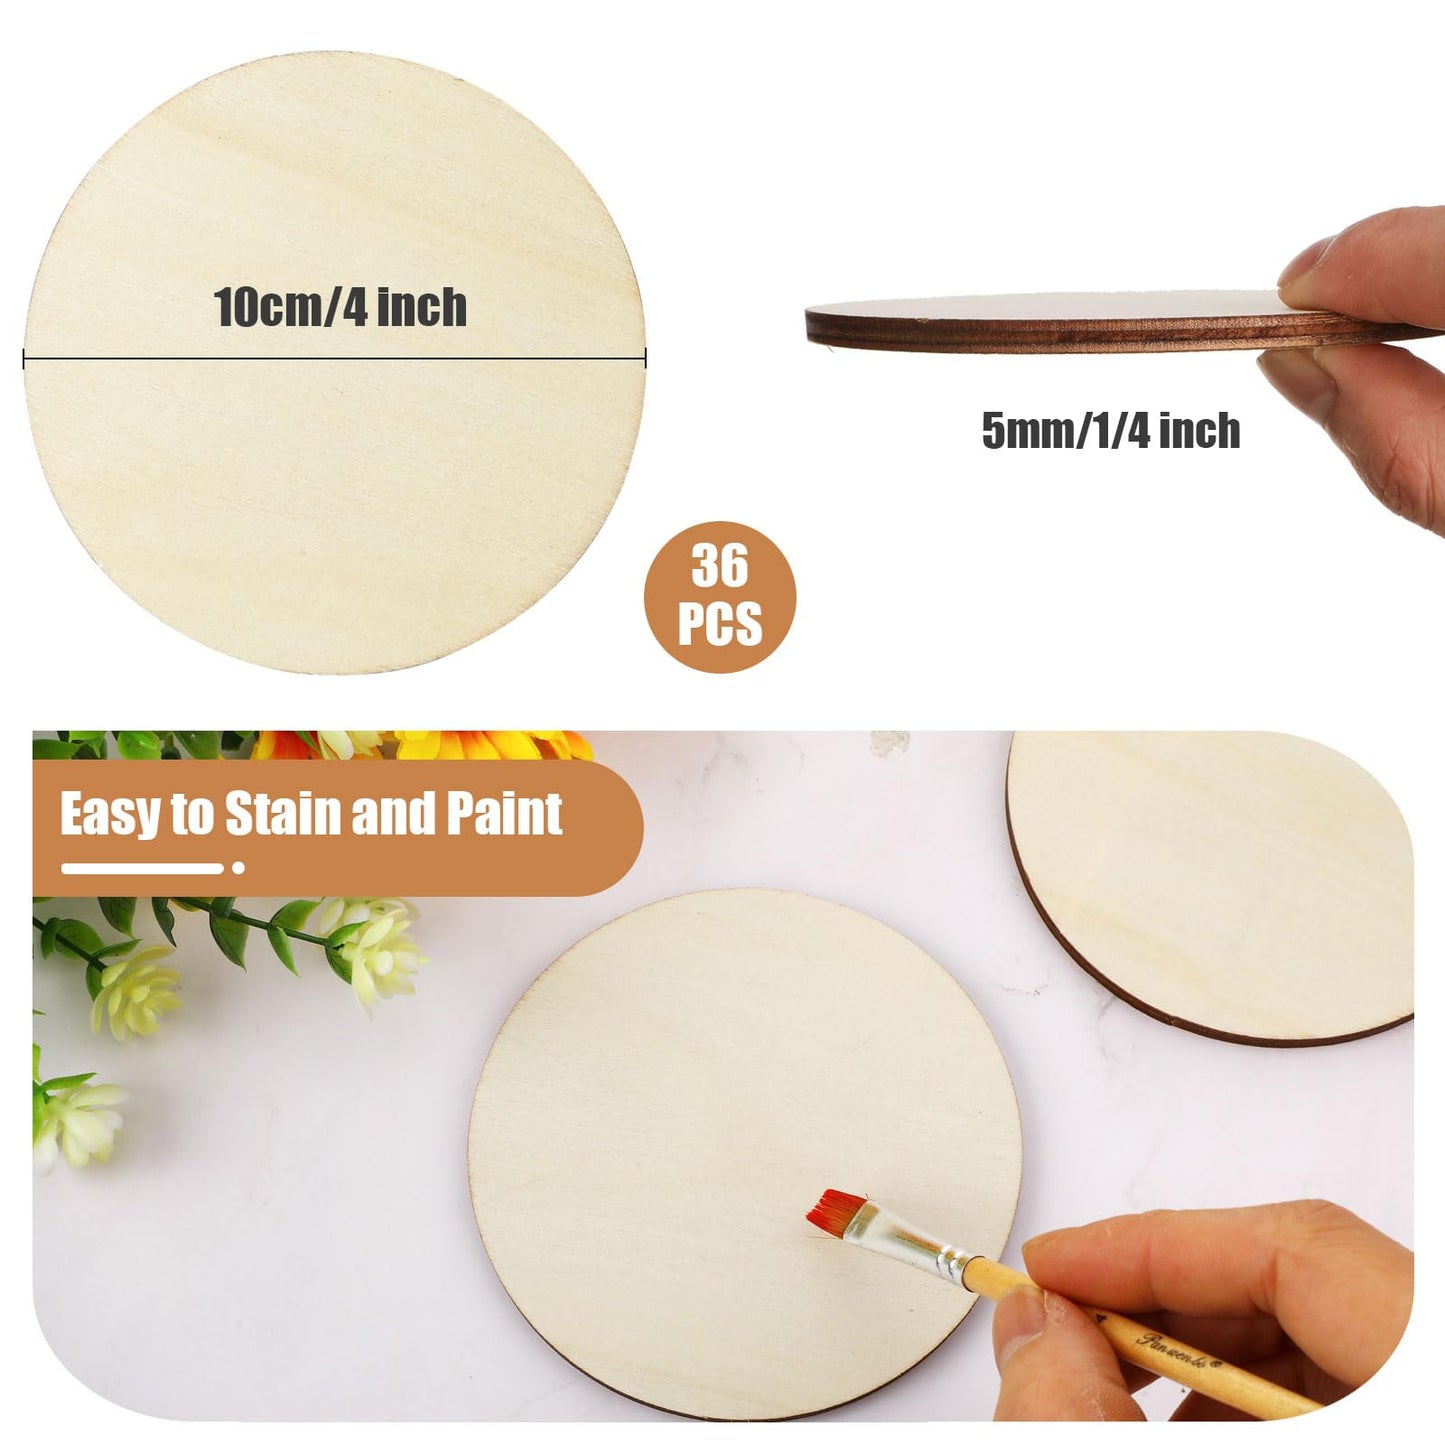 36 Pcs 4 Inch Wood Circles Unfinished Round Wooden Discs Blank Wood Rounds Natural Wood Round Cutouts Slices for DIY Crafts Coaster Painting Staining